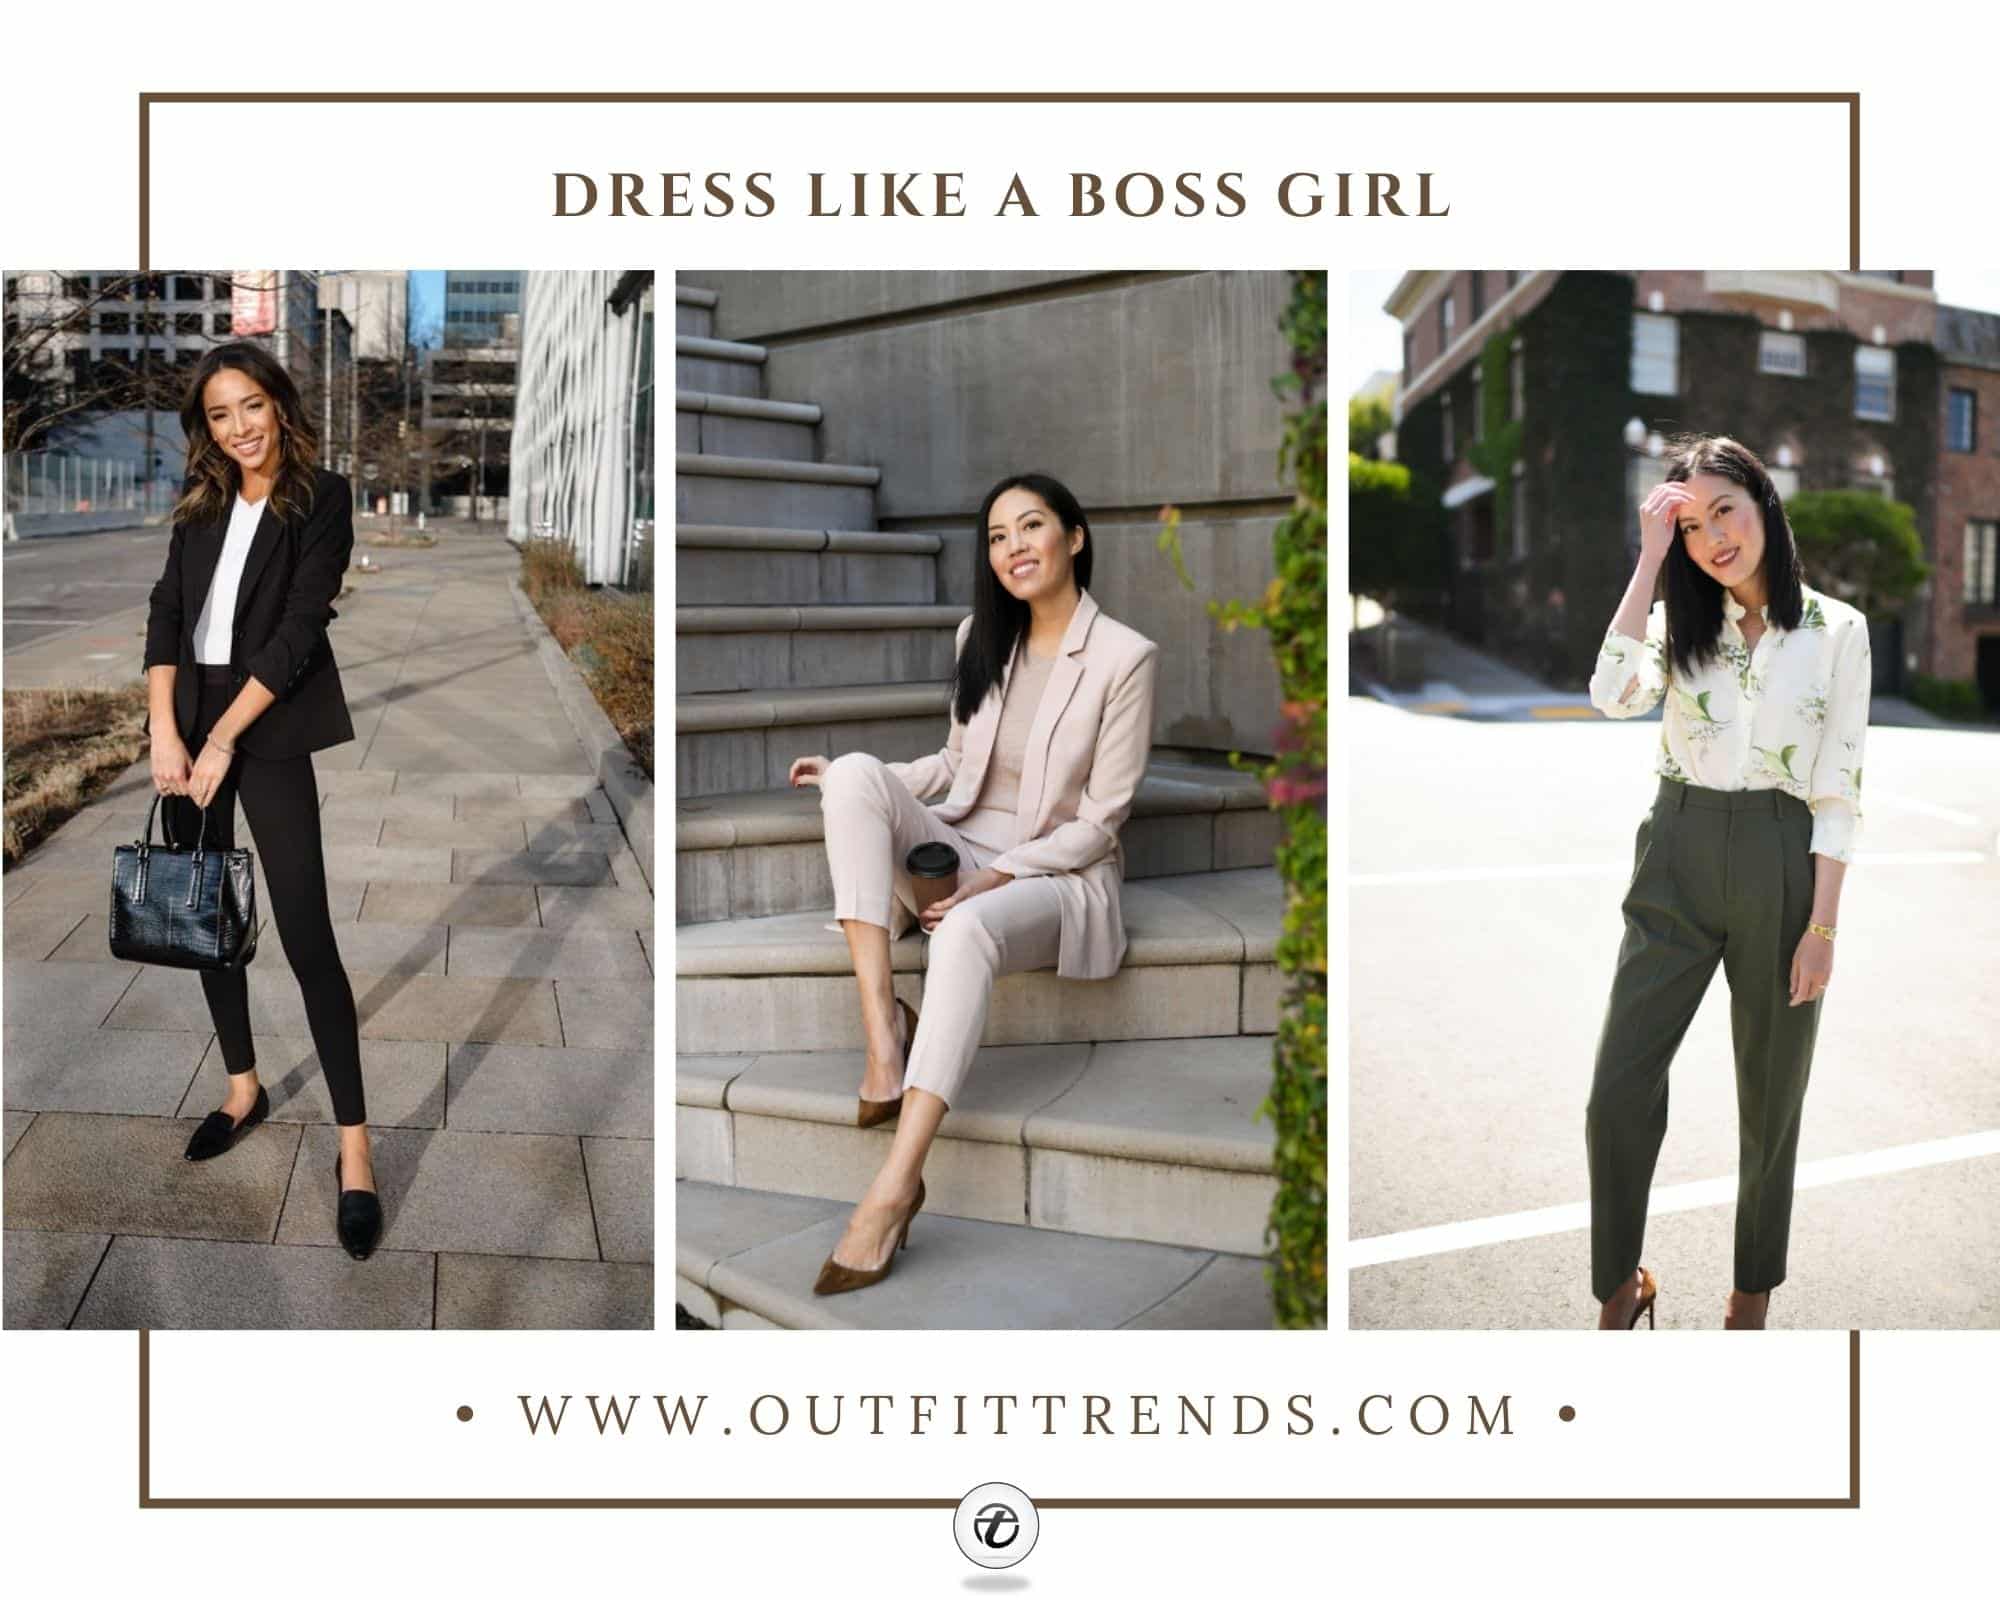 Best Boss Girl Outfits 10 Ways To Dress Like A Boss Lady | vlr.eng.br